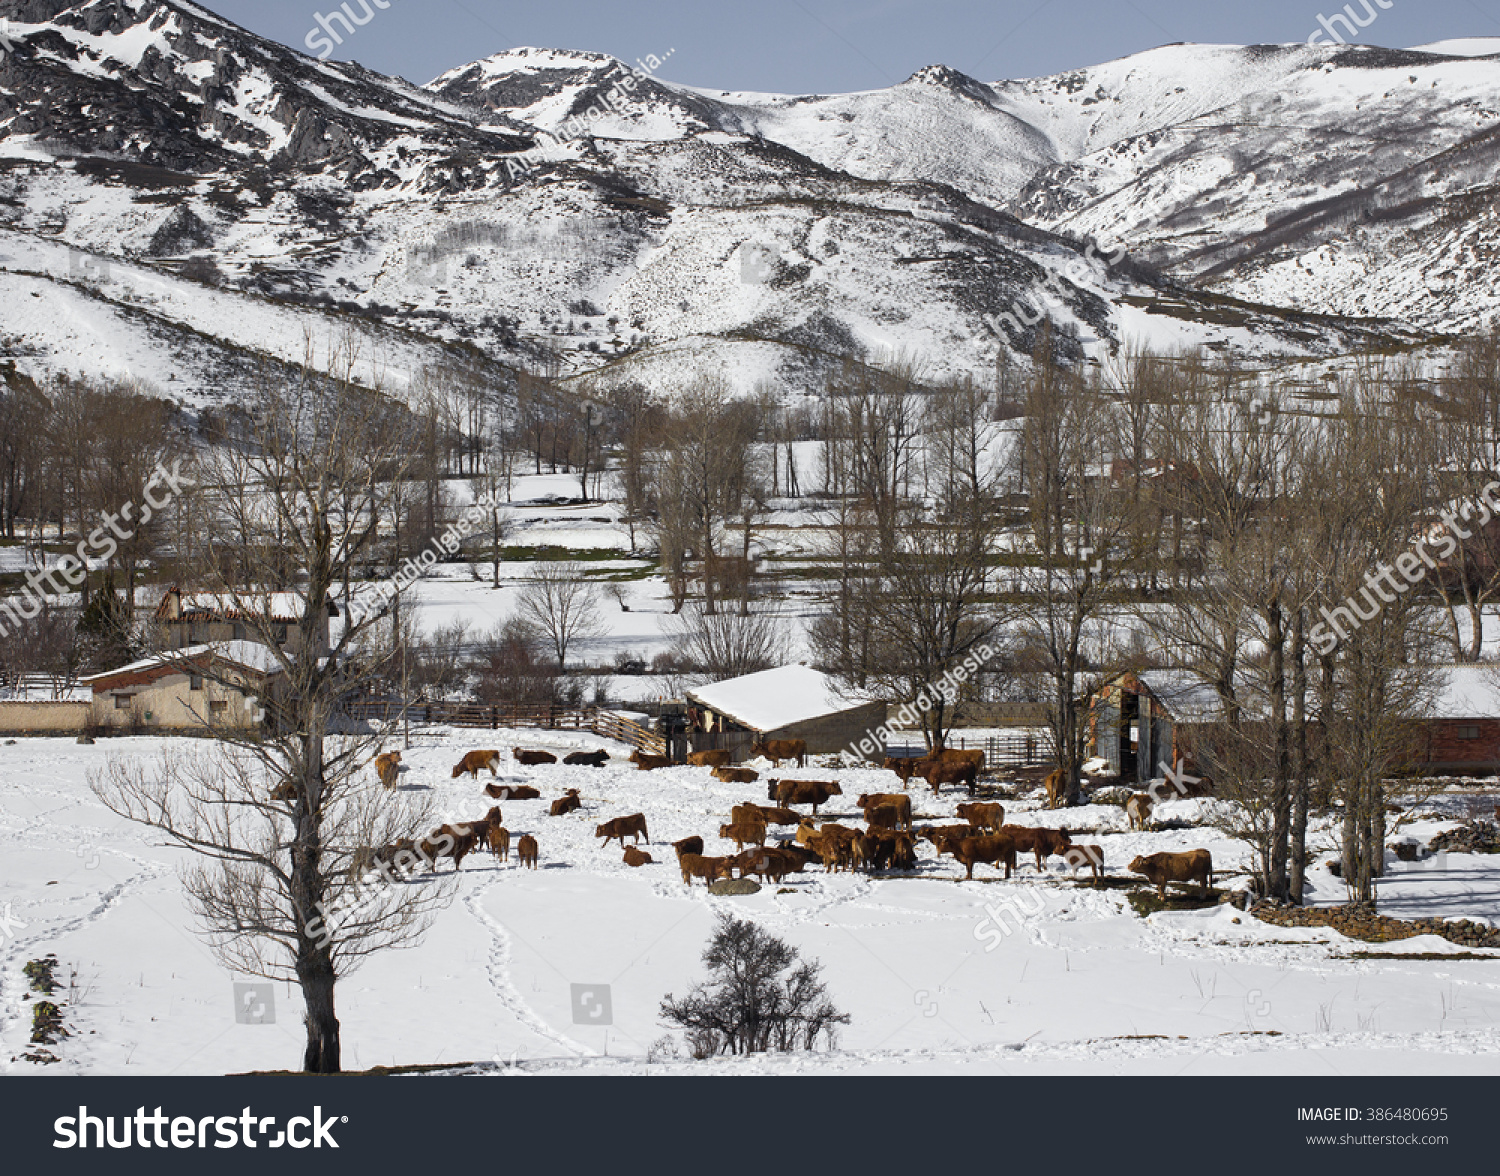 Cows on snow covered countryside #386480695